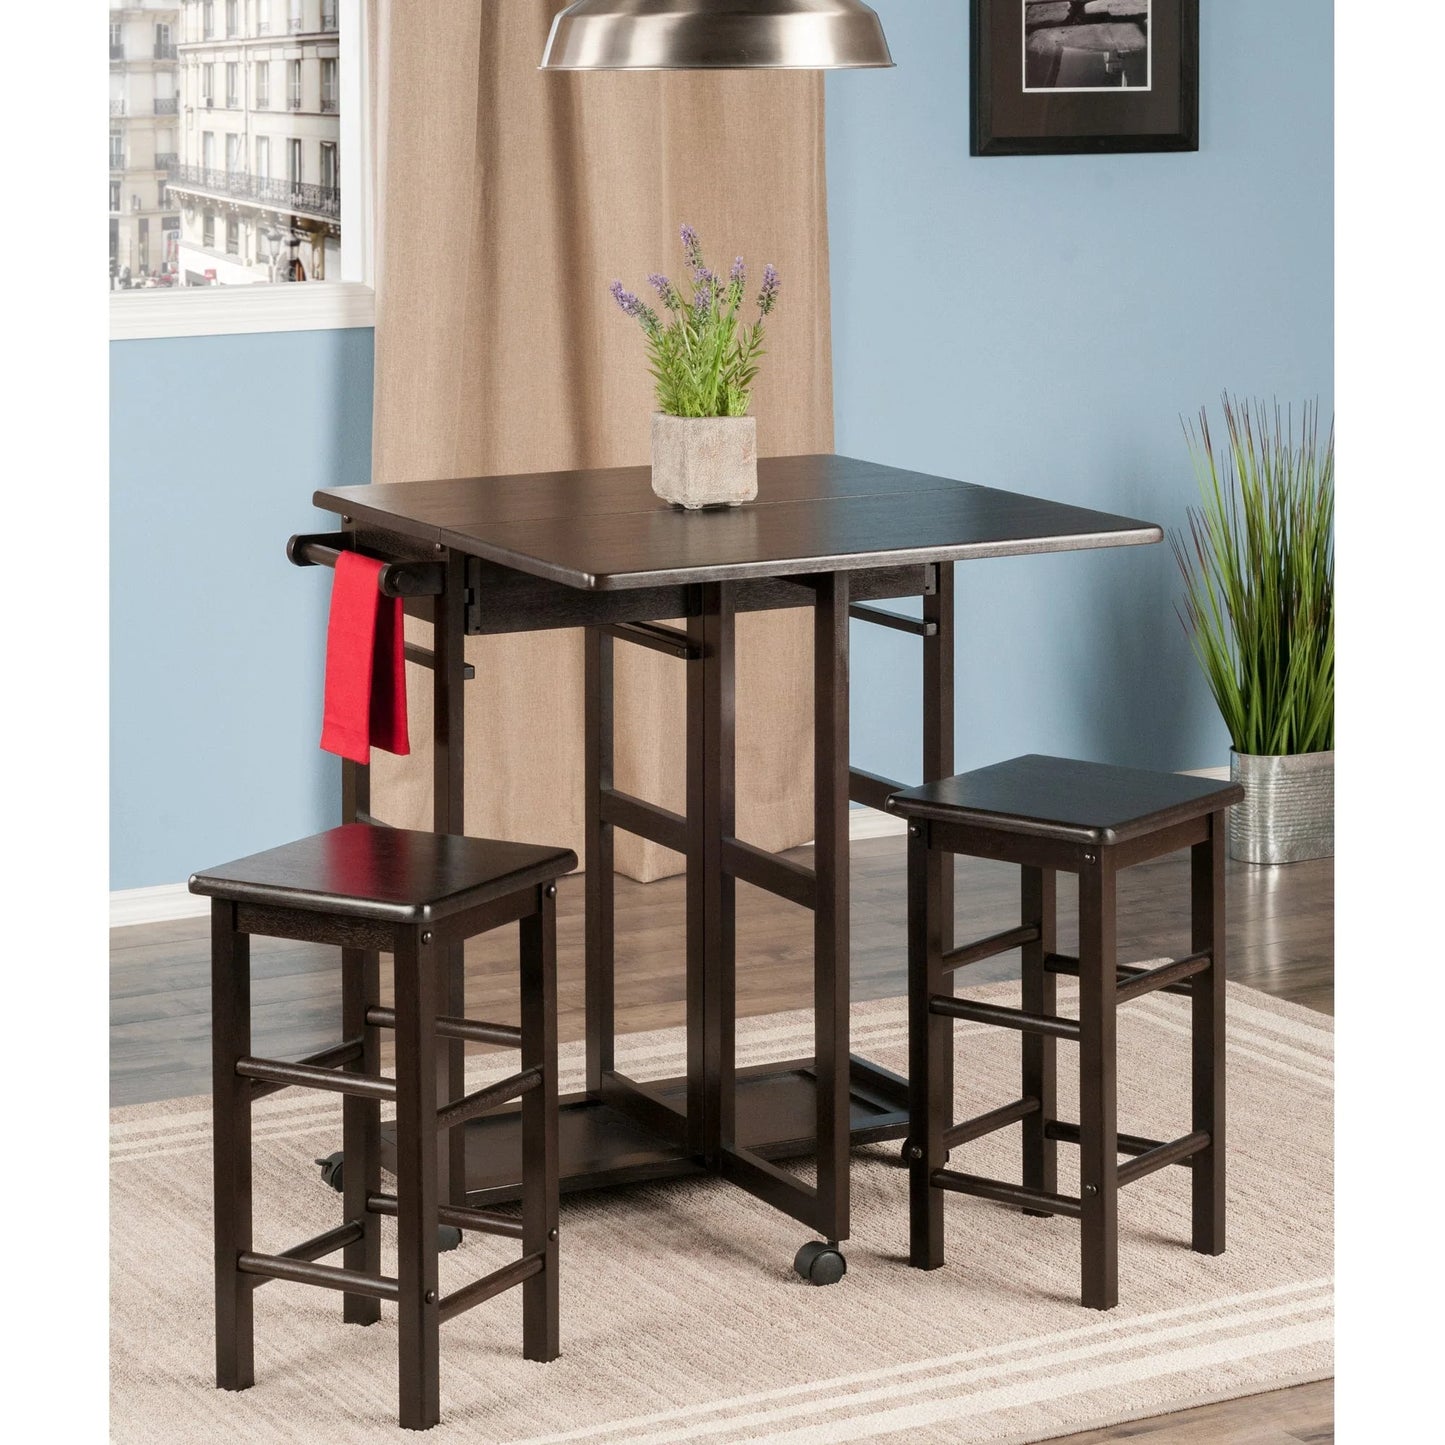 WINSOME Pub Table Set Suzanne 3-Pc Space Saver Set, Coffee